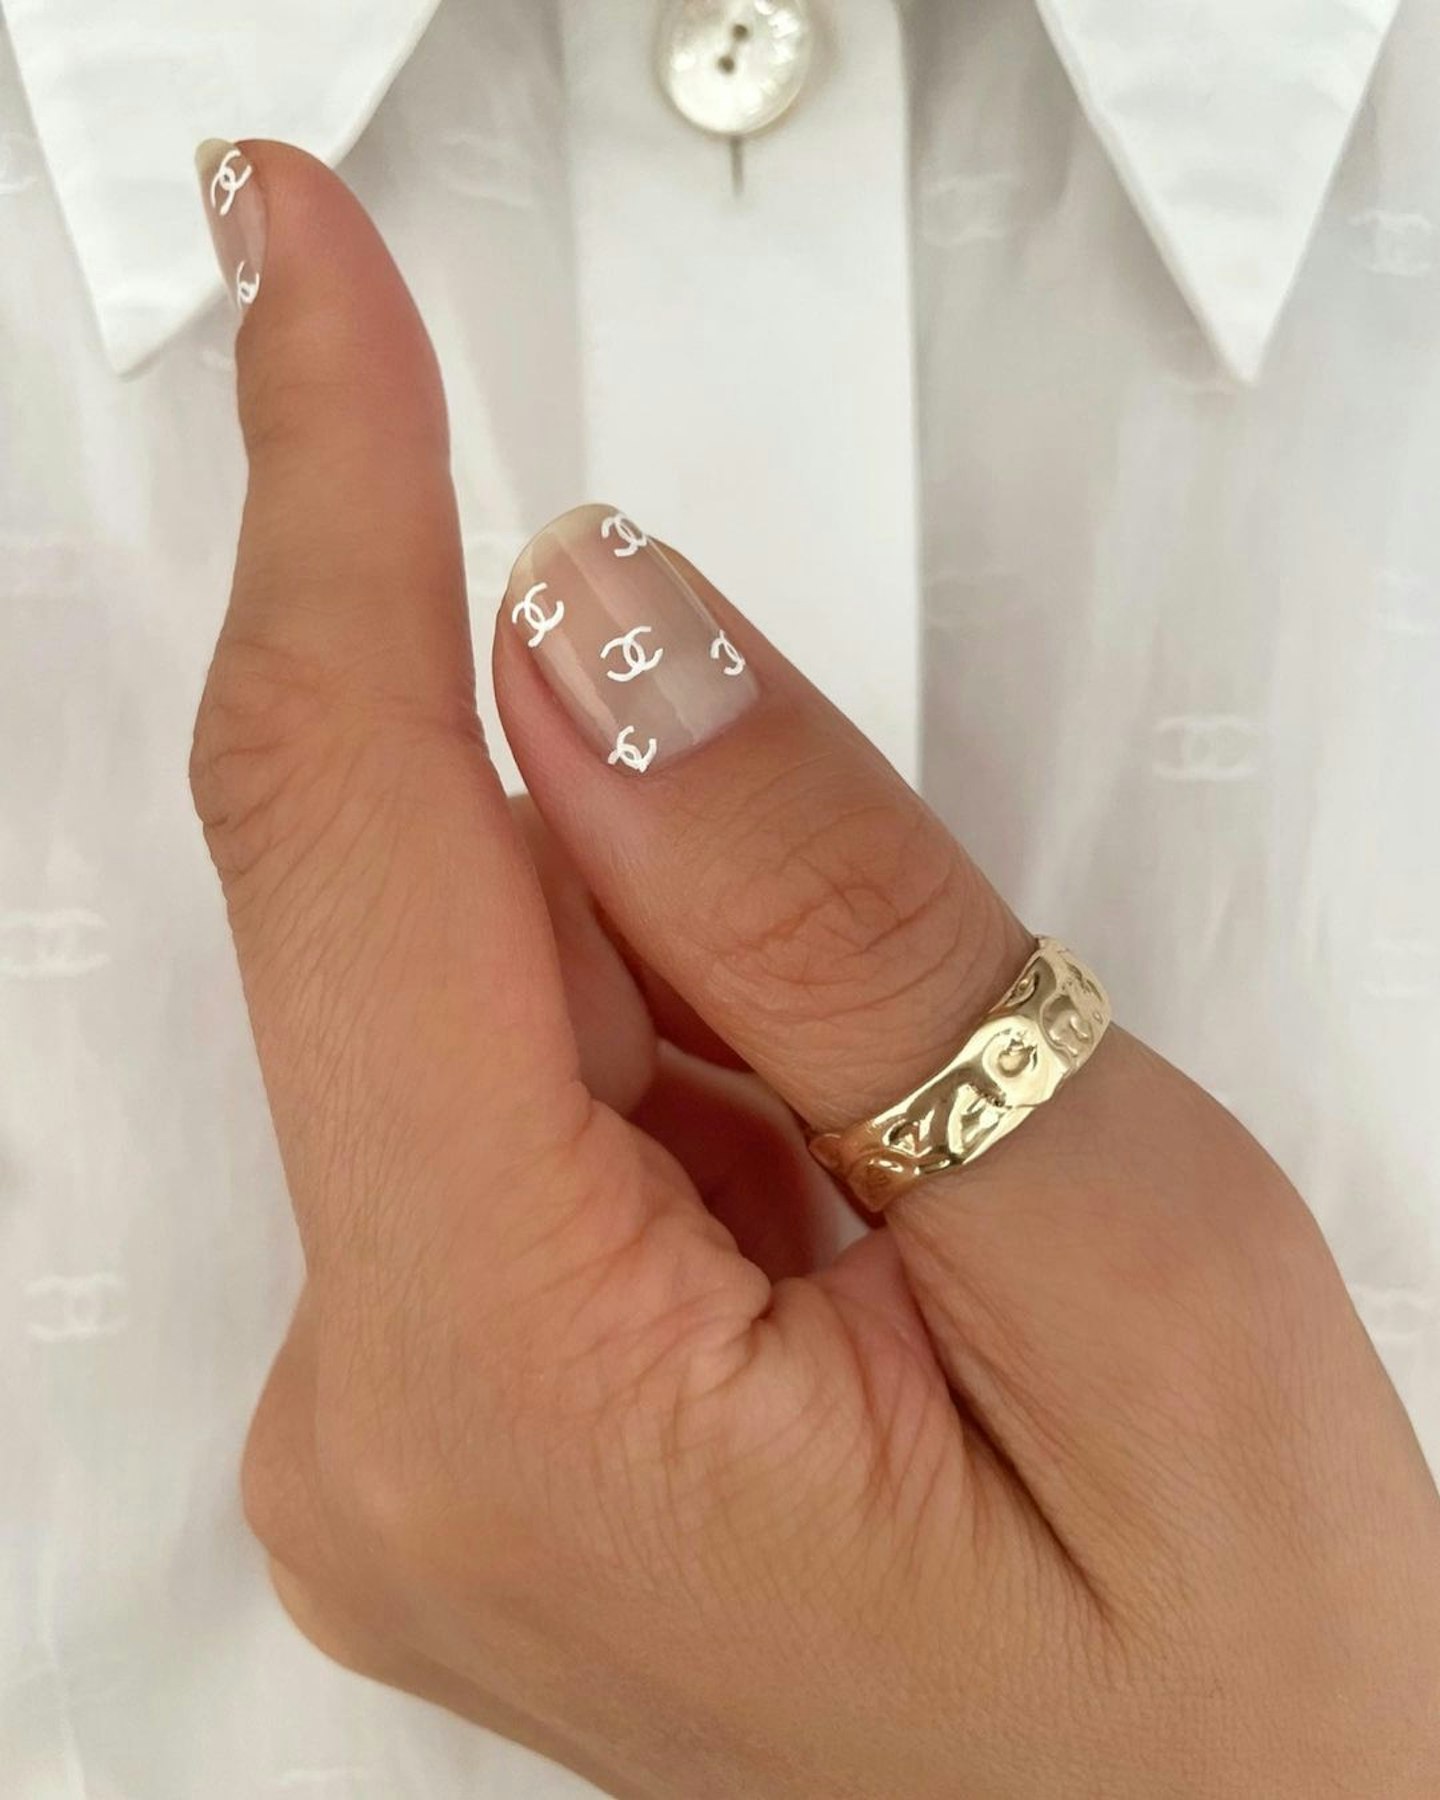 Logo Nails Are Our Latest Mani Obsession, And They’ll Now Be Yours Too